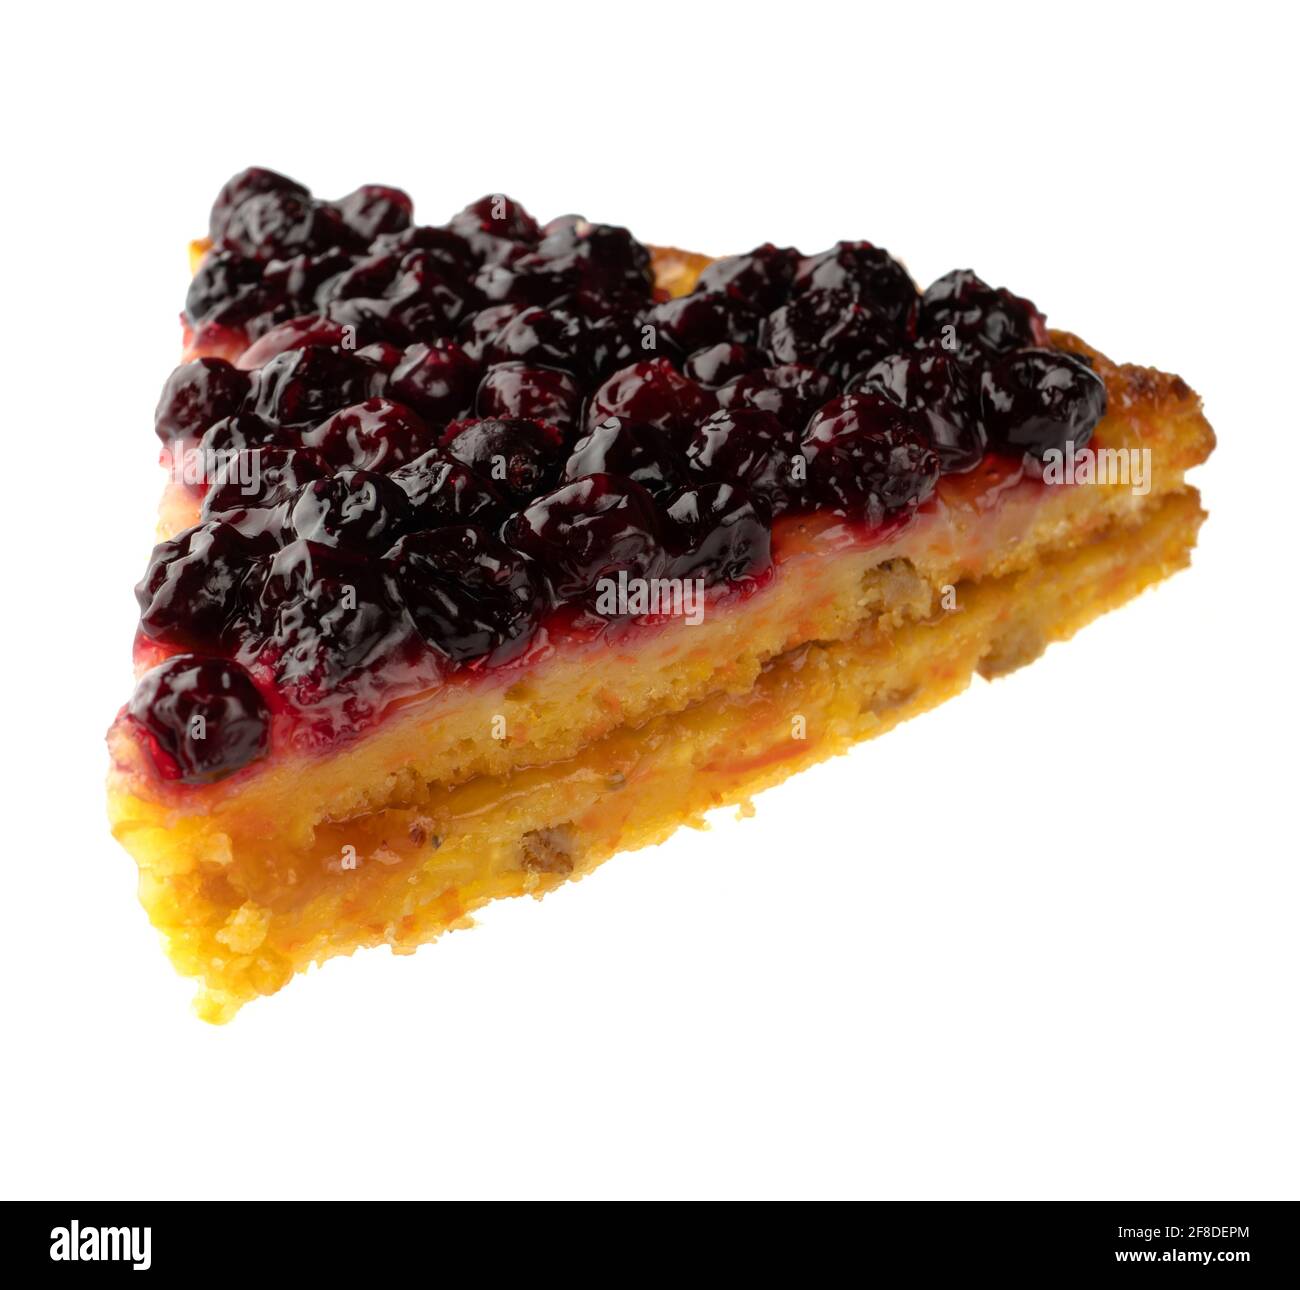 Sliced piece of carrot pie, sprinkled with currant berries on top, on white background Stock Photo